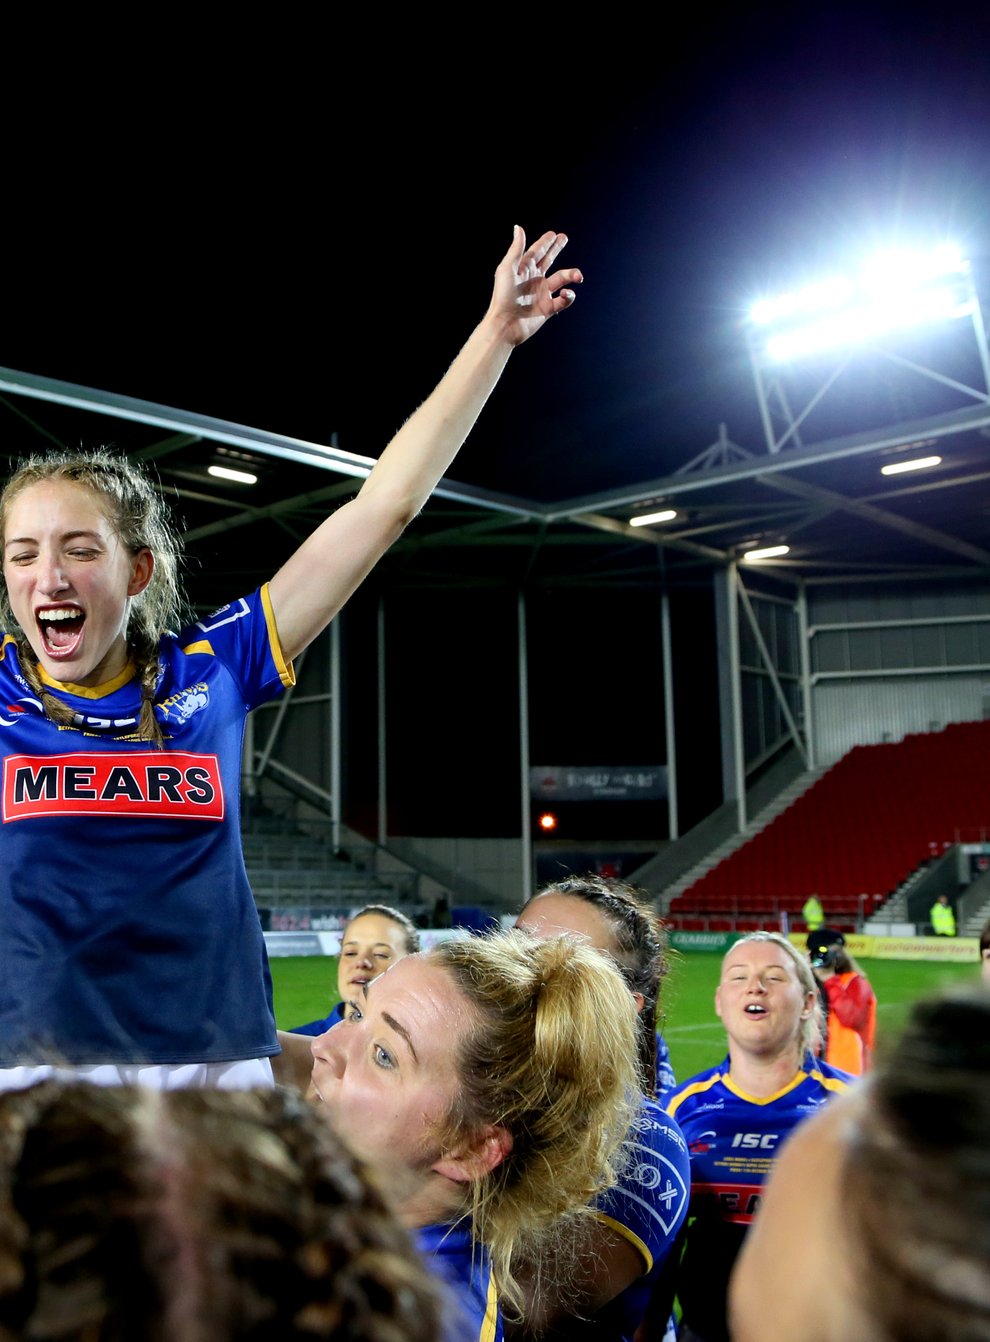 Leeds beat Castleford Tigers in the WSL final last season (PA Images)